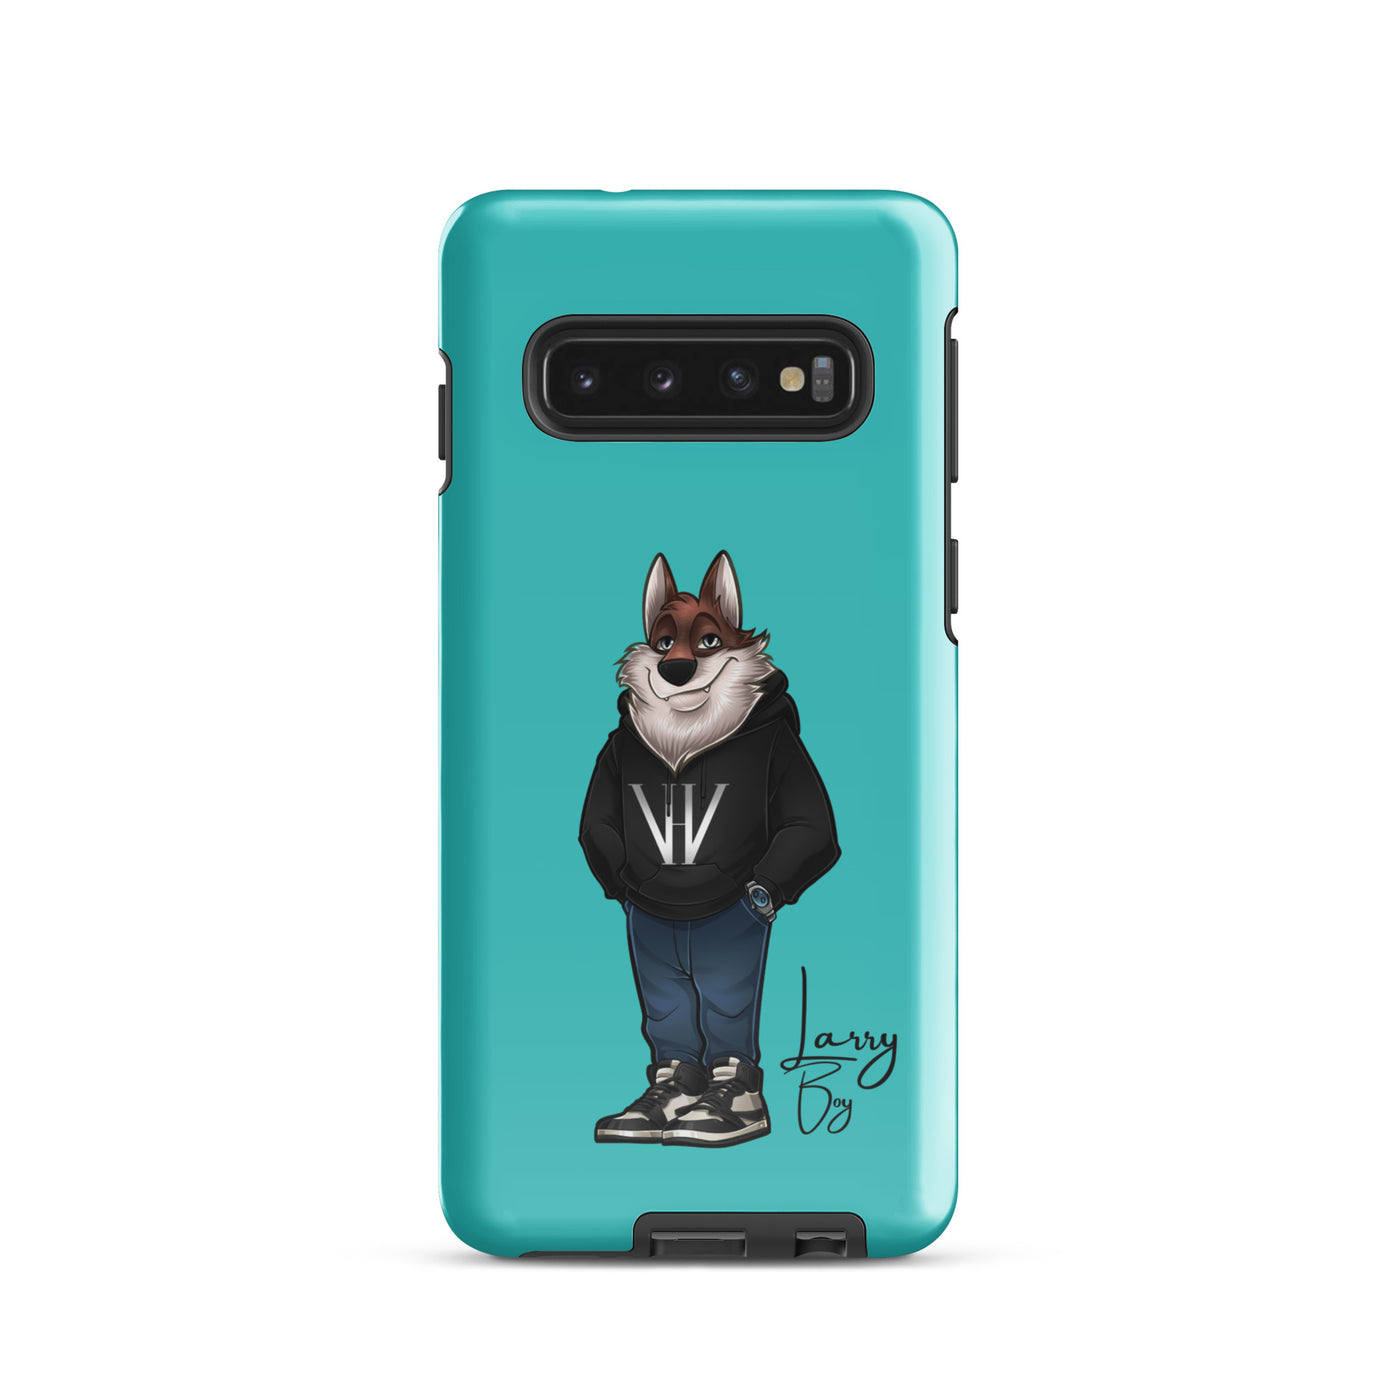 Larrry Boy - Tough case for Samsung® - Turquoise